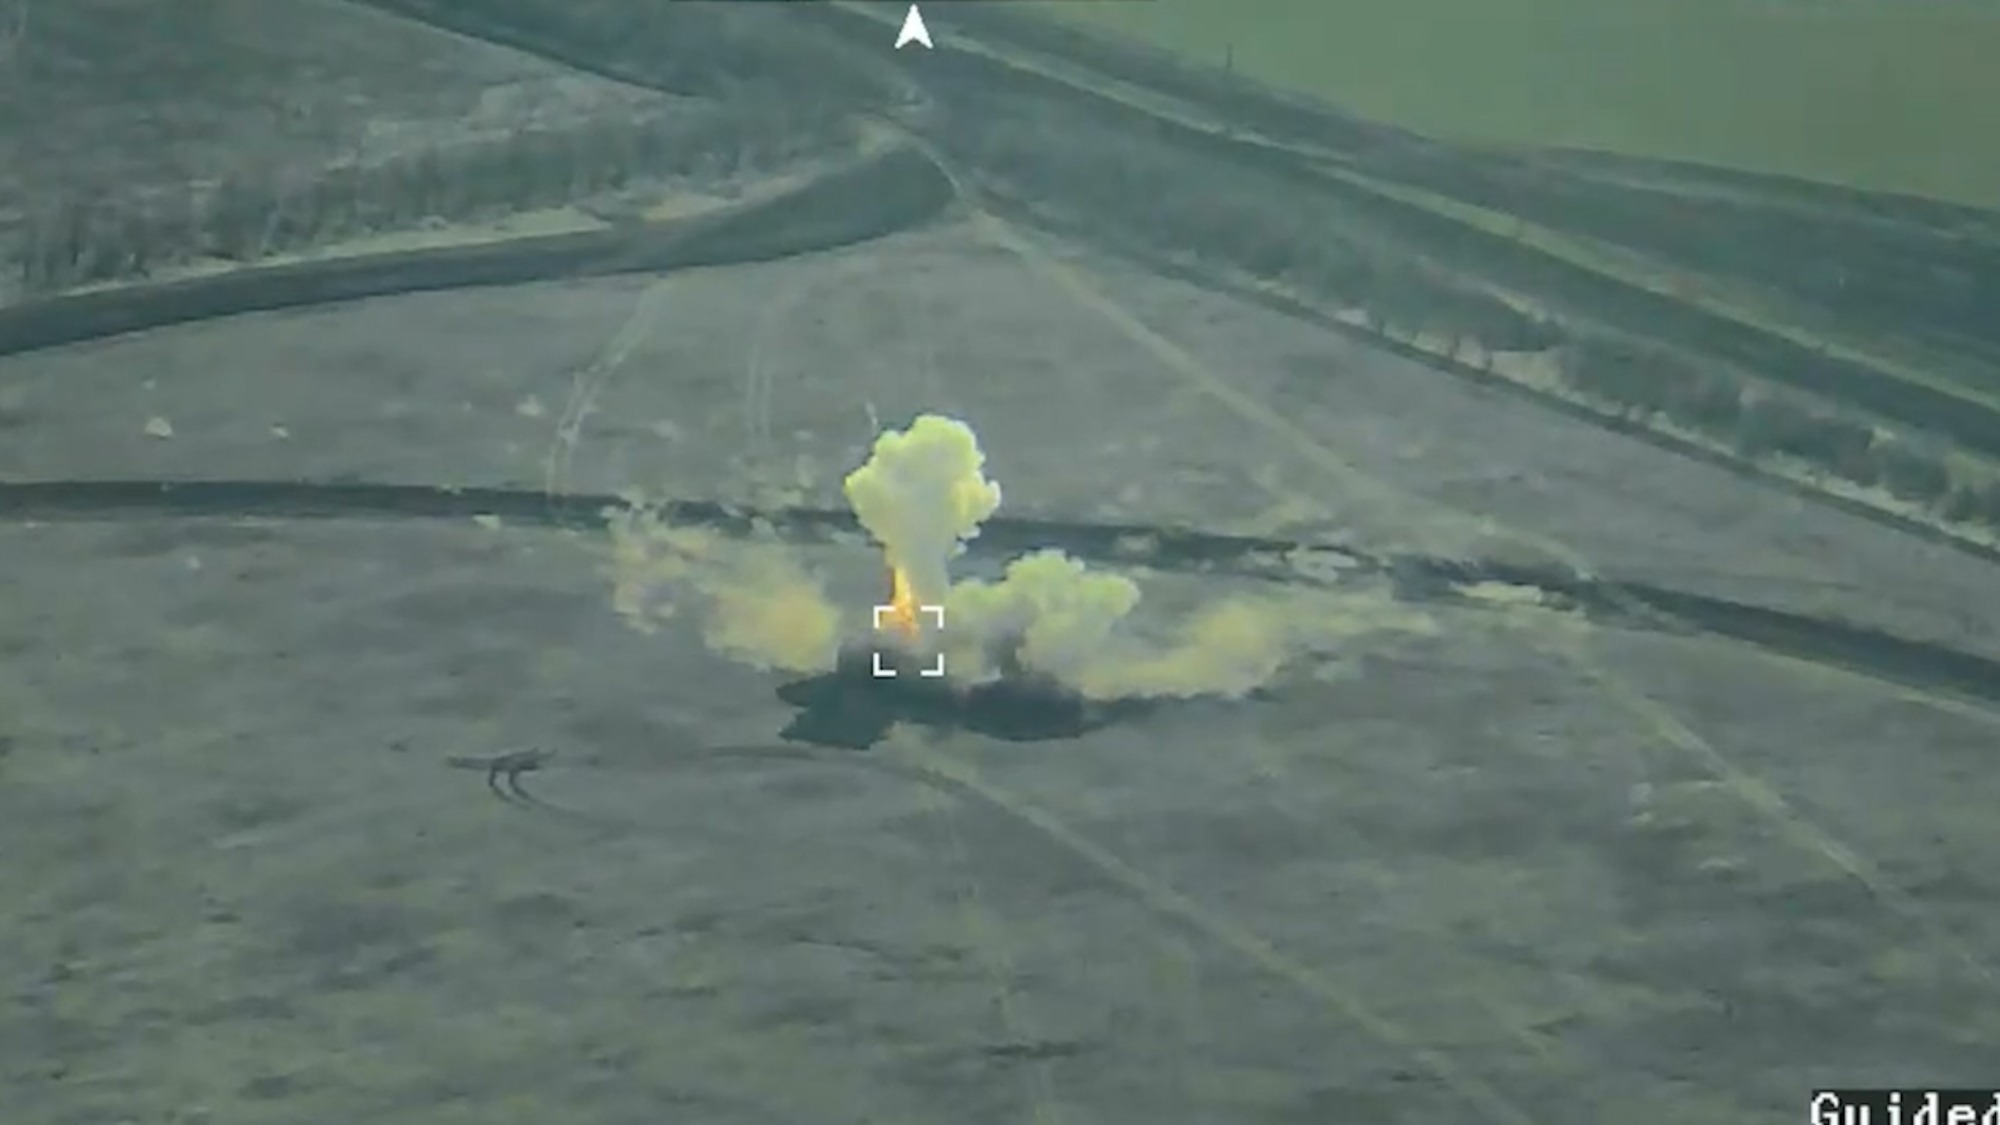 Ukrainian Special Forces Destroy Russian BUK Surface-To-Air Missile System With HIMARS